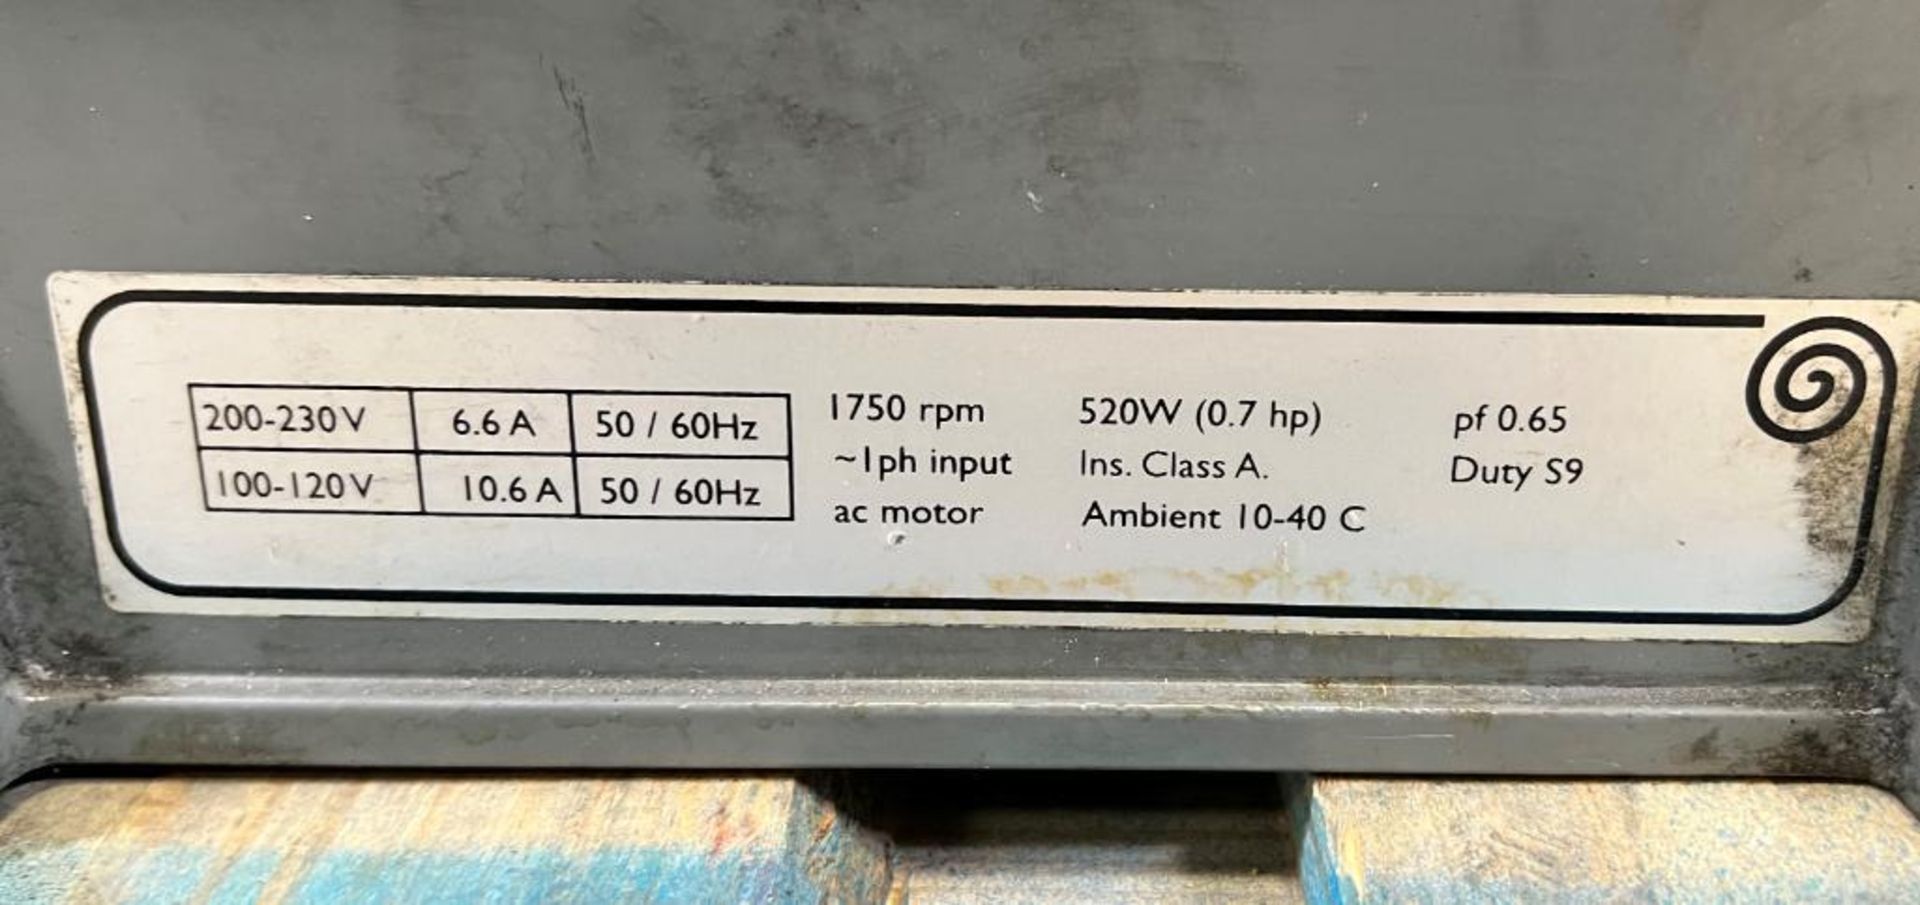 Edward Chemical Resistant Scroll Vacuum Pump, Model XDS35iC, Serial# 200389805, Built 2020. - Image 7 of 7